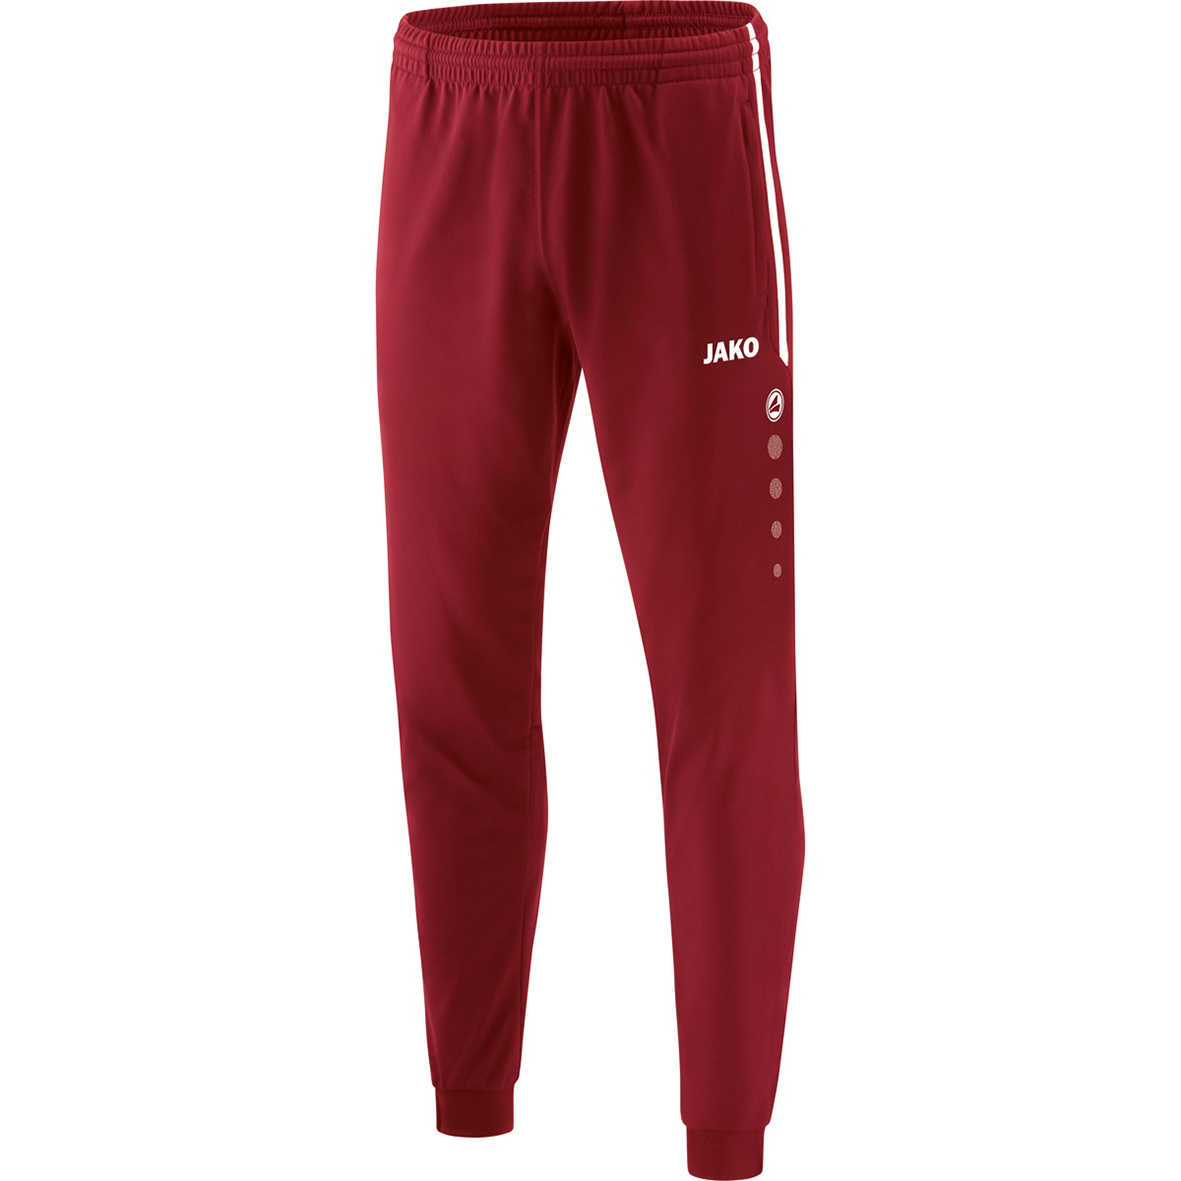 TROUSERS JAKO COMPETITION 2.0, WINE RED KIDS.